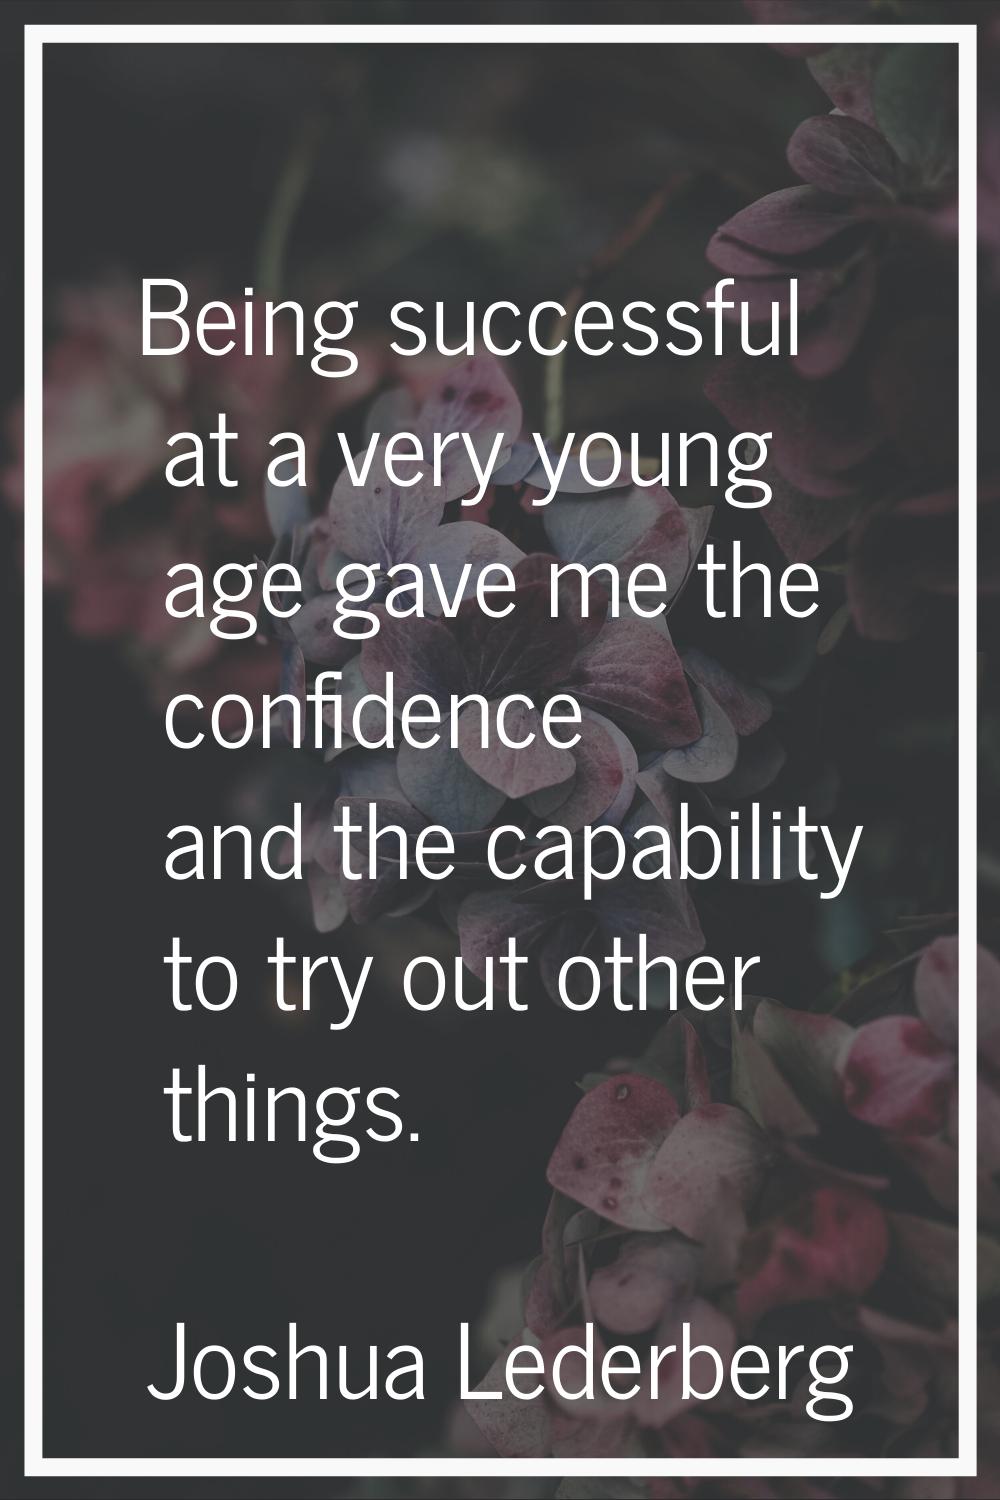 Being successful at a very young age gave me the confidence and the capability to try out other thi